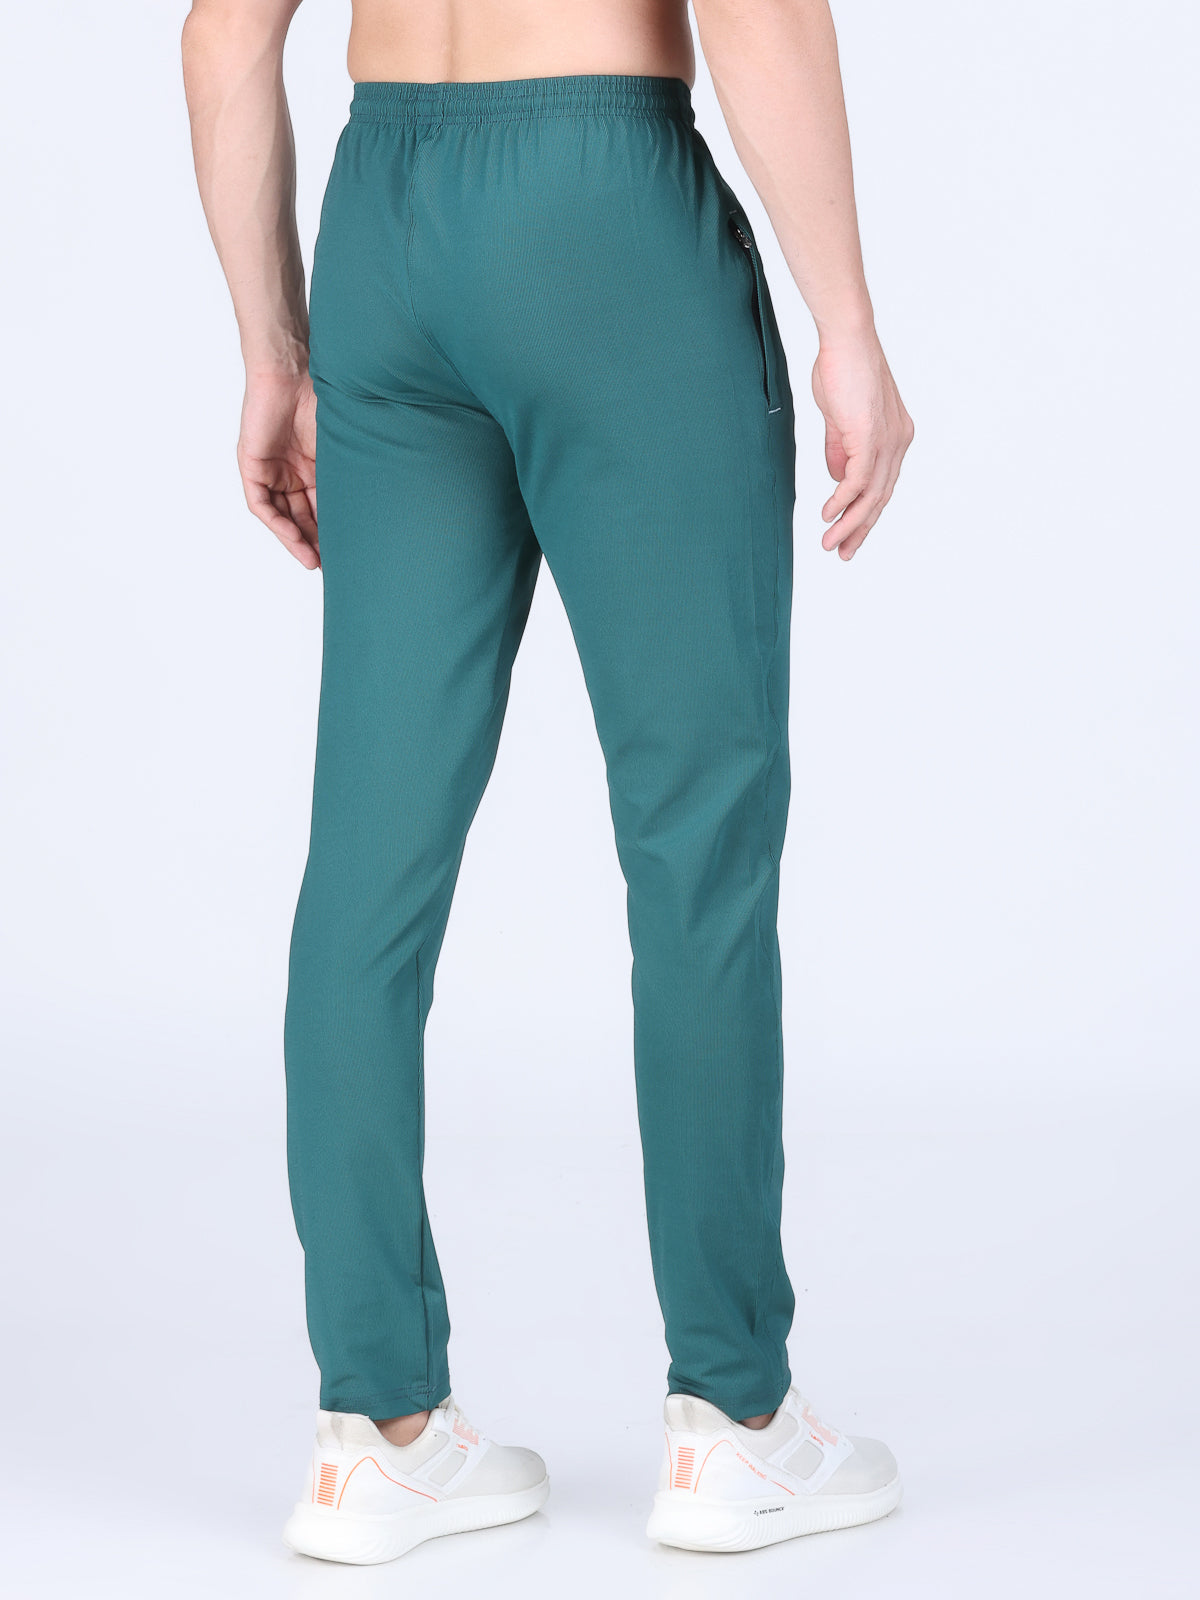 Combo of 2 Men's 4 Way Stretch Lining Bottle Green and Coffee Track Pant